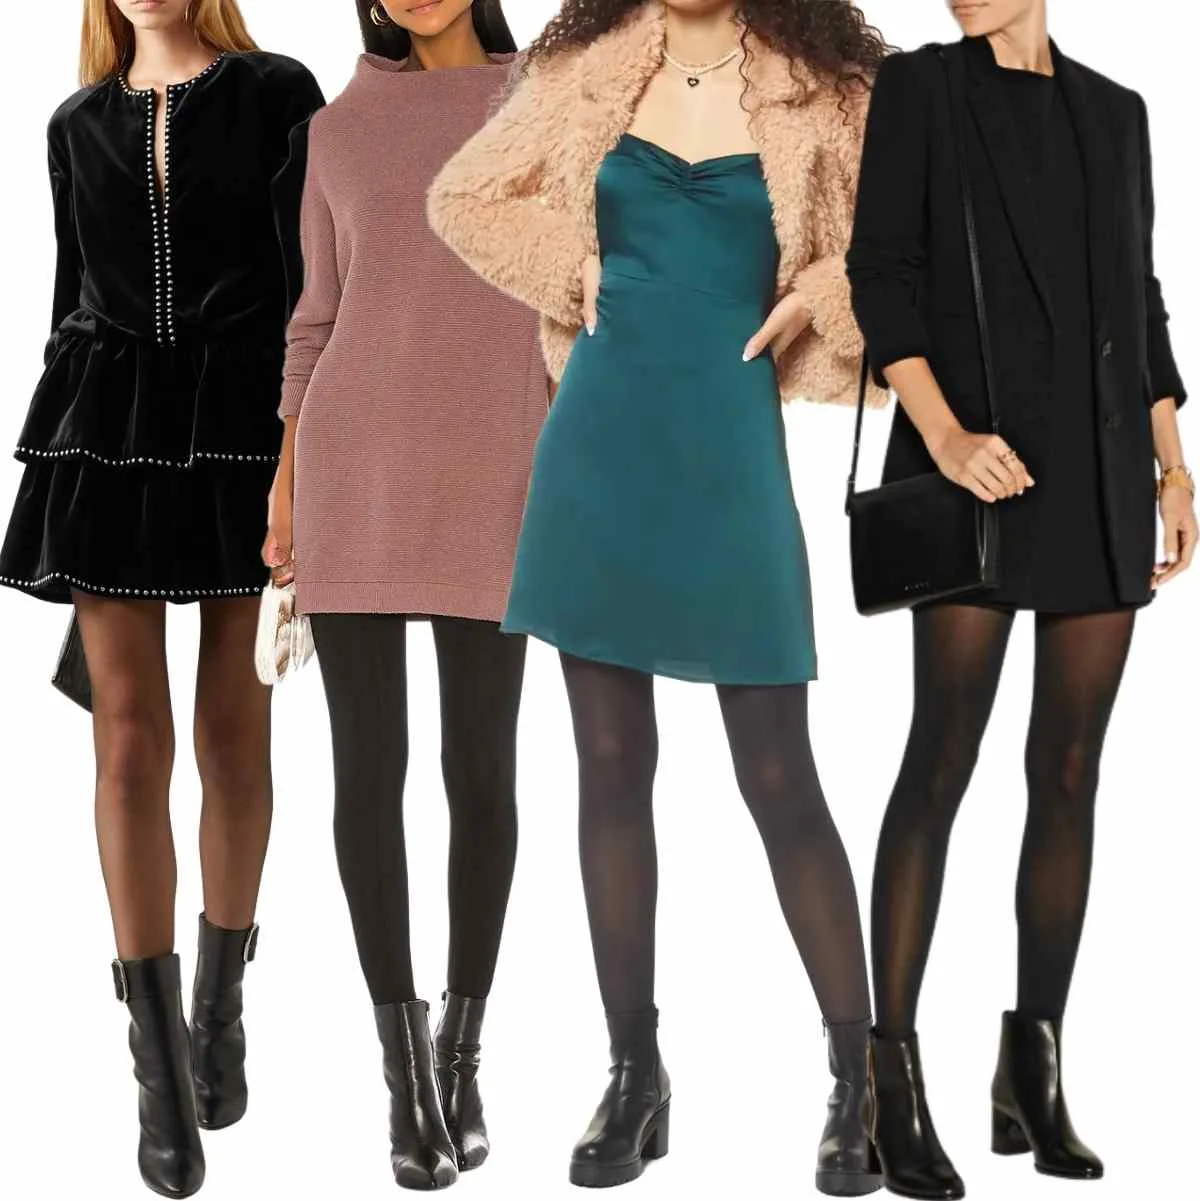 cocktail dress w black tights  Fashion, Dresses for work, Little